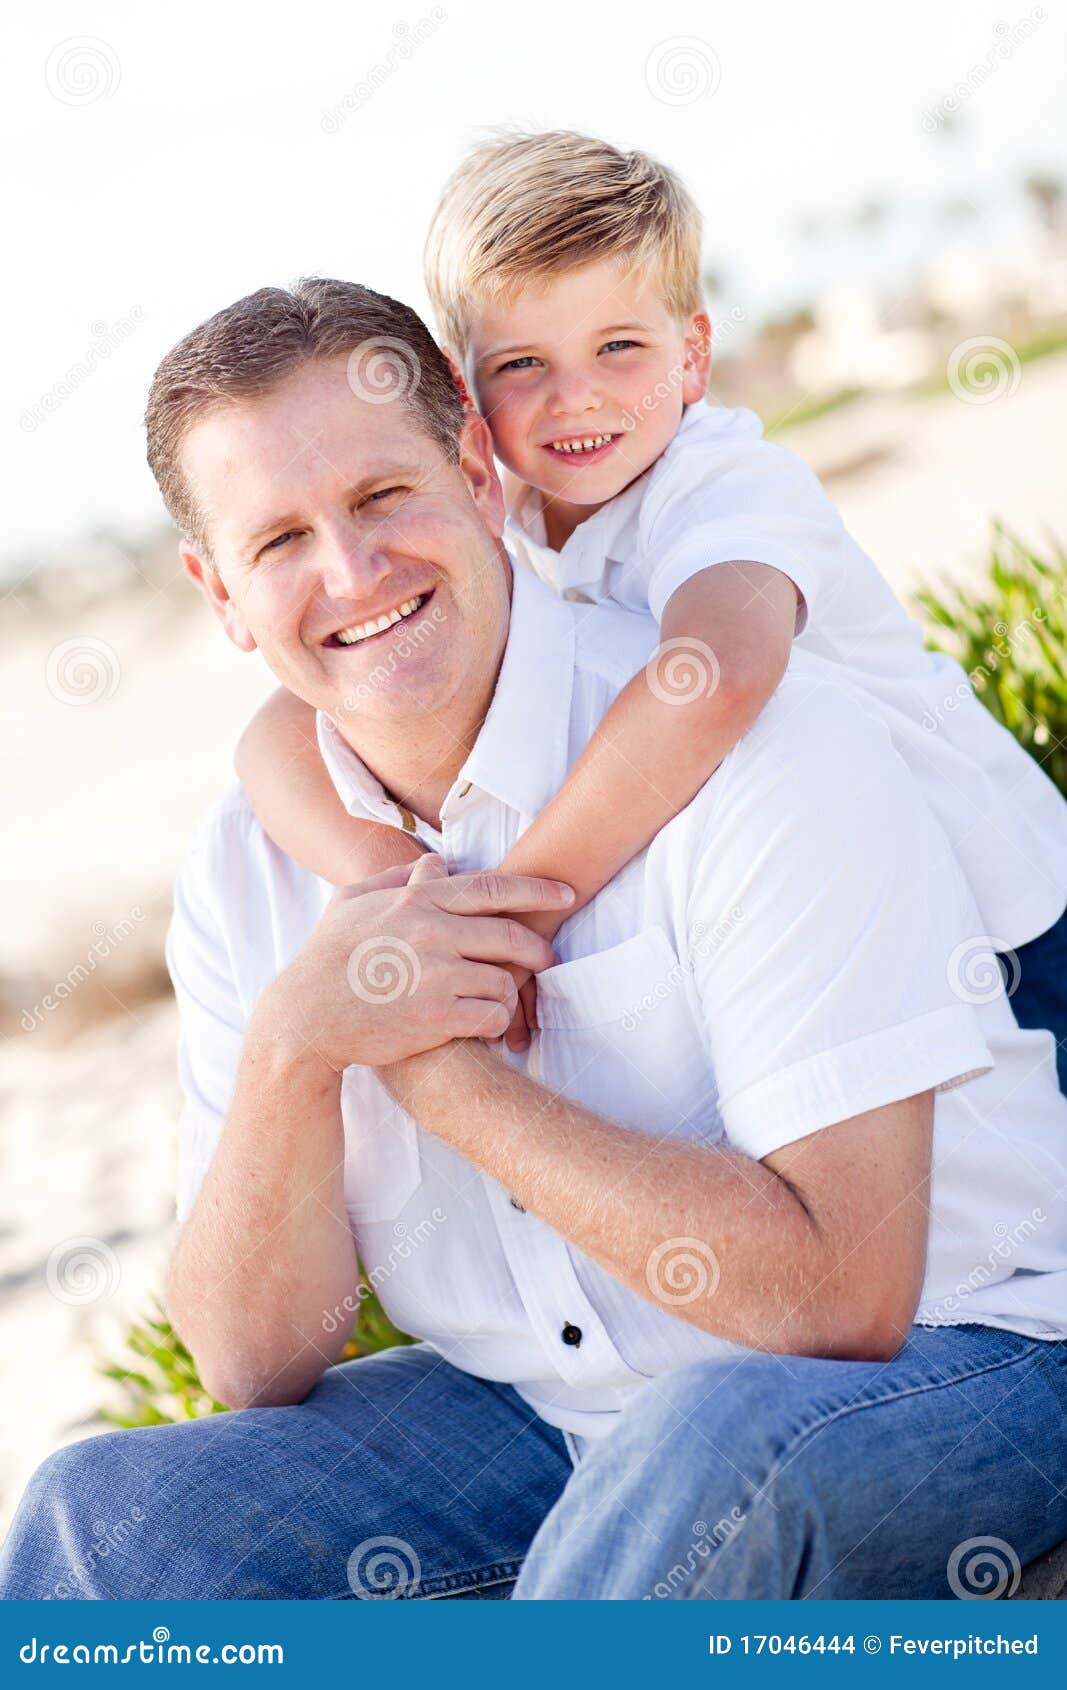 Cute Son With His Handsome Dad Portrait Stock Photo - Image of child